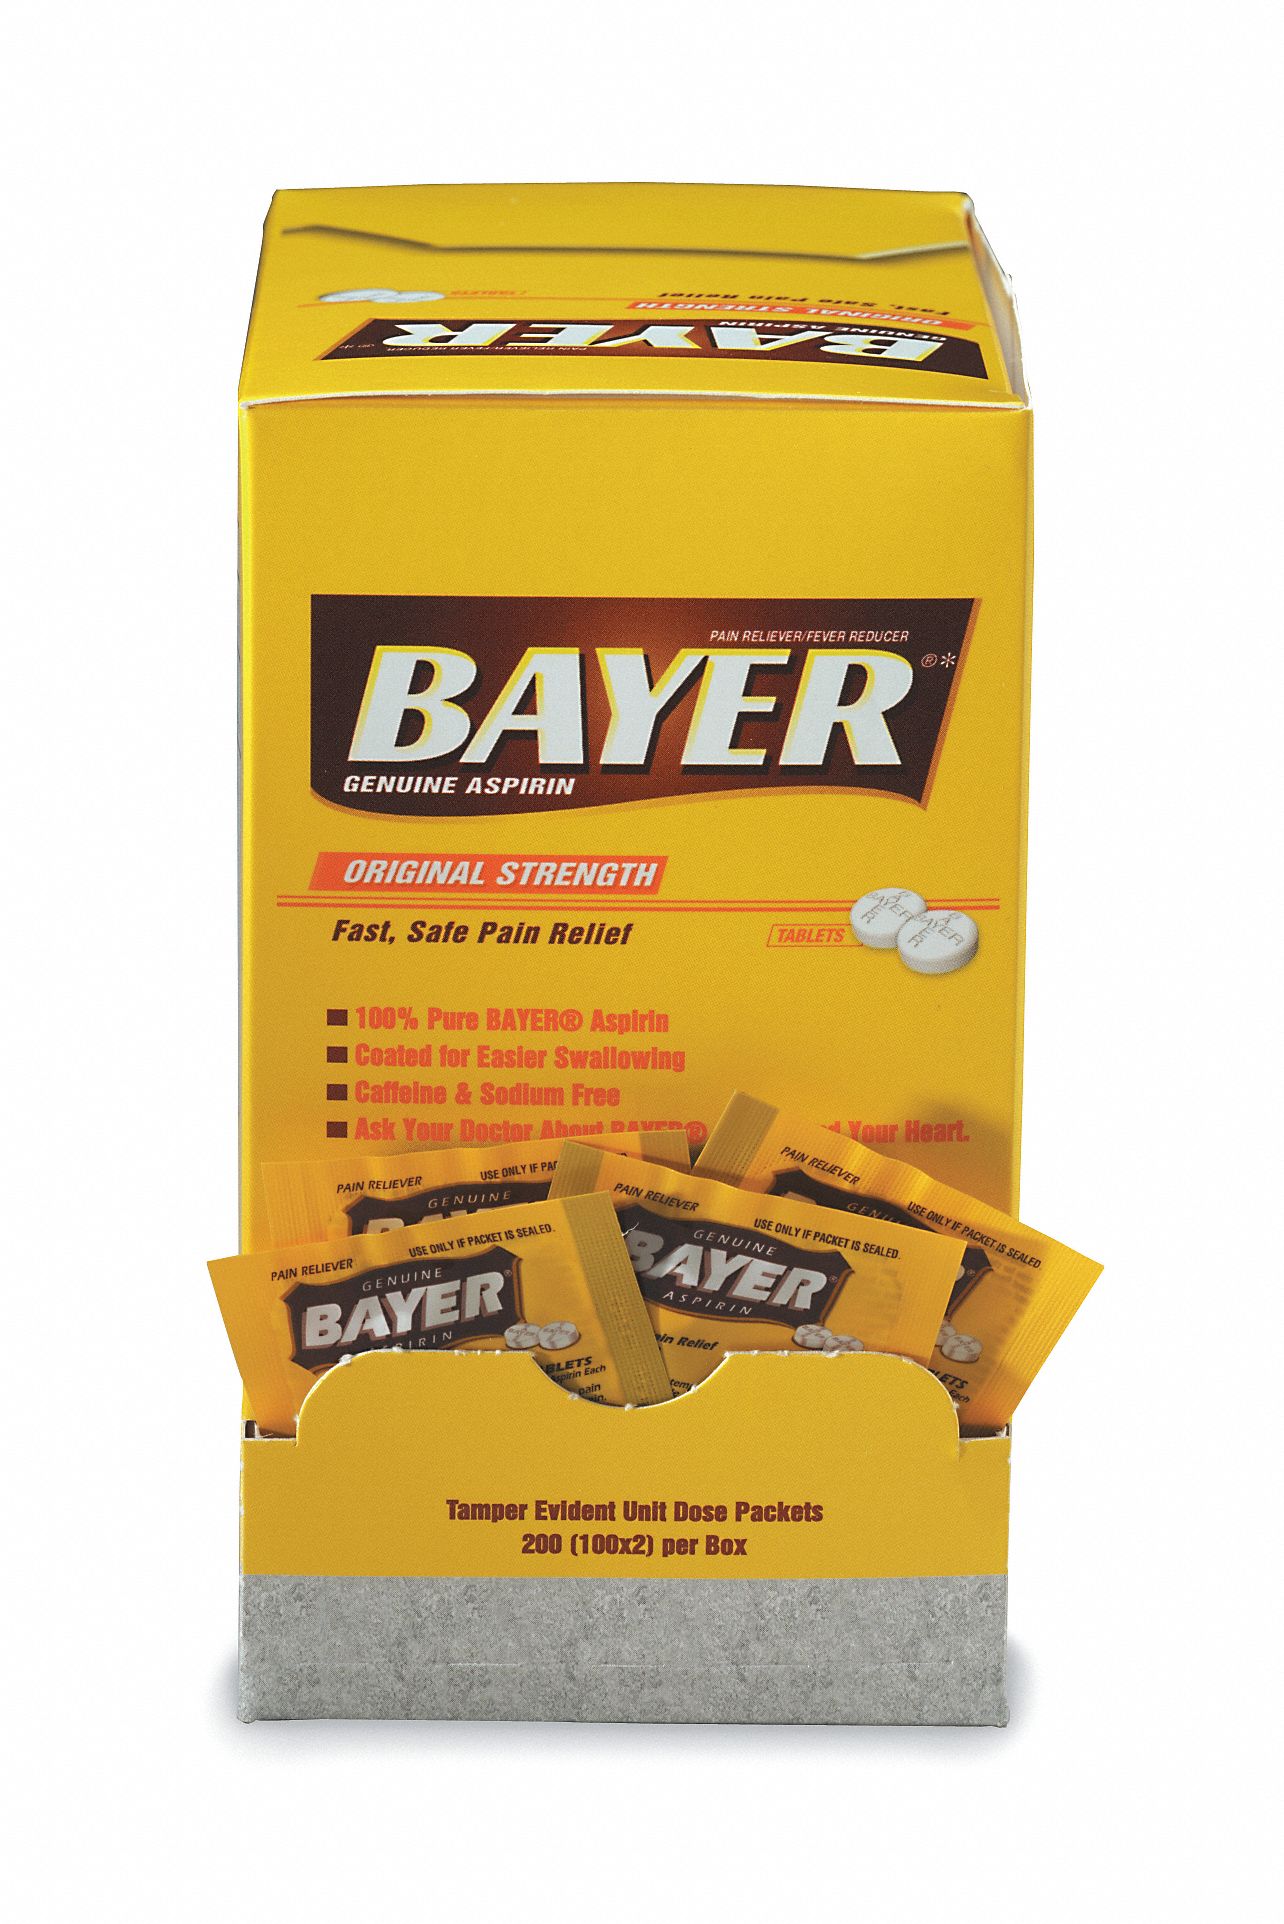 Bayer Pain Relief: Tablet, 100 x 2, Box/Wrapped Packets, Unflavored, Aspirin, 200 PK